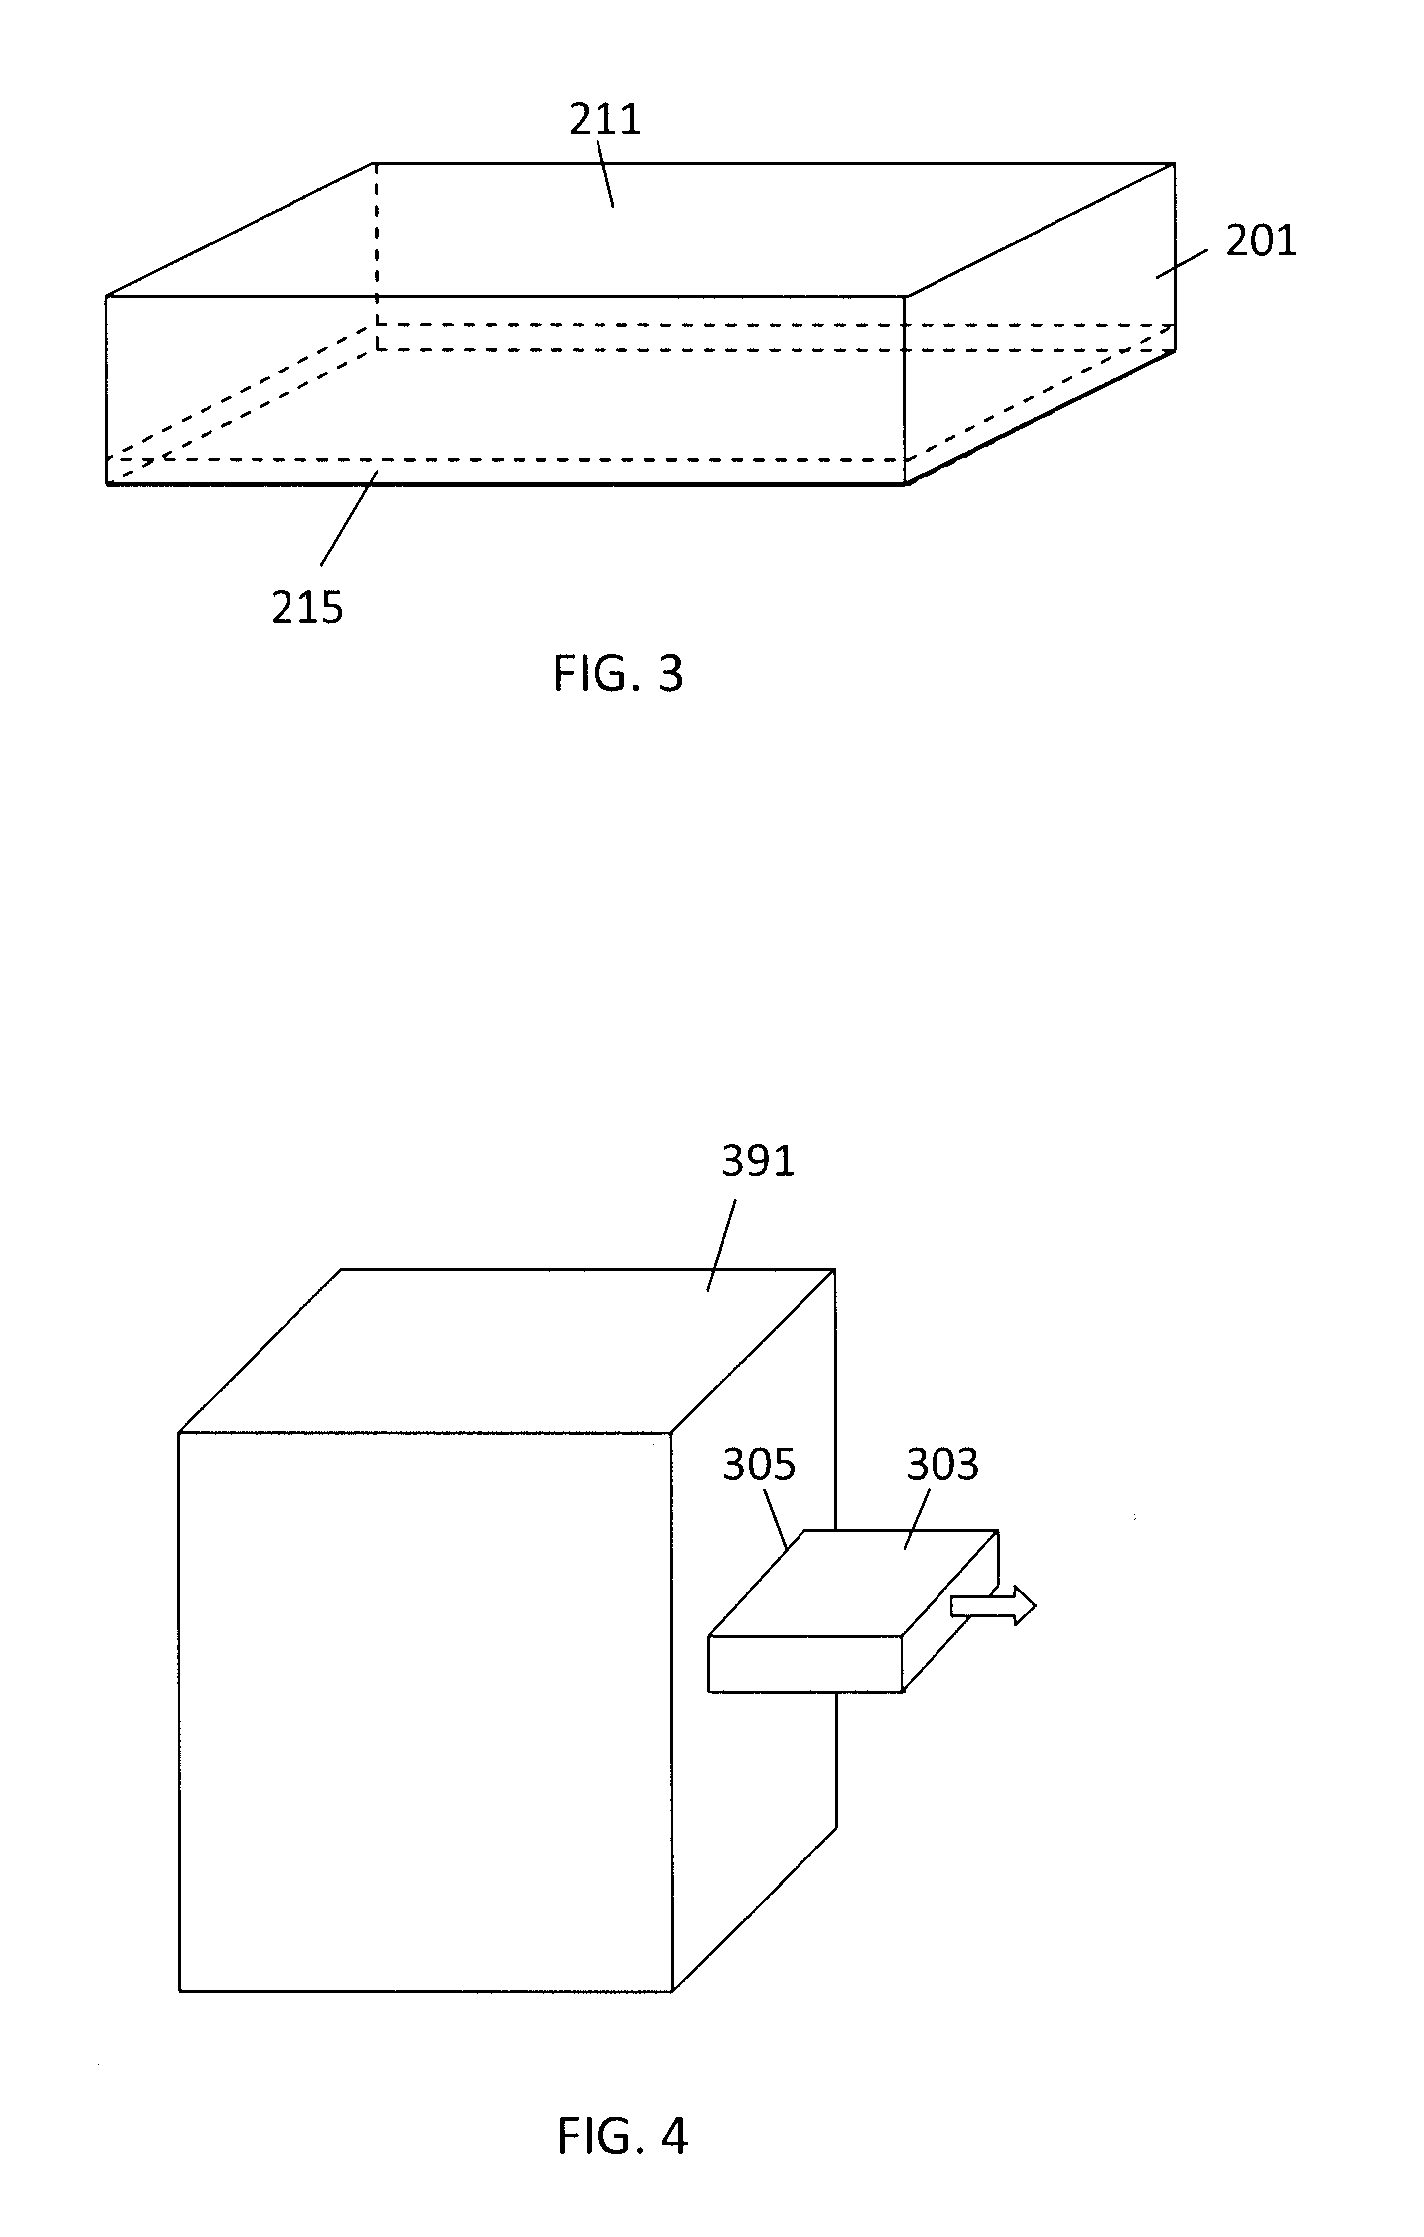 Thermally conductive polymer based printed circuit board